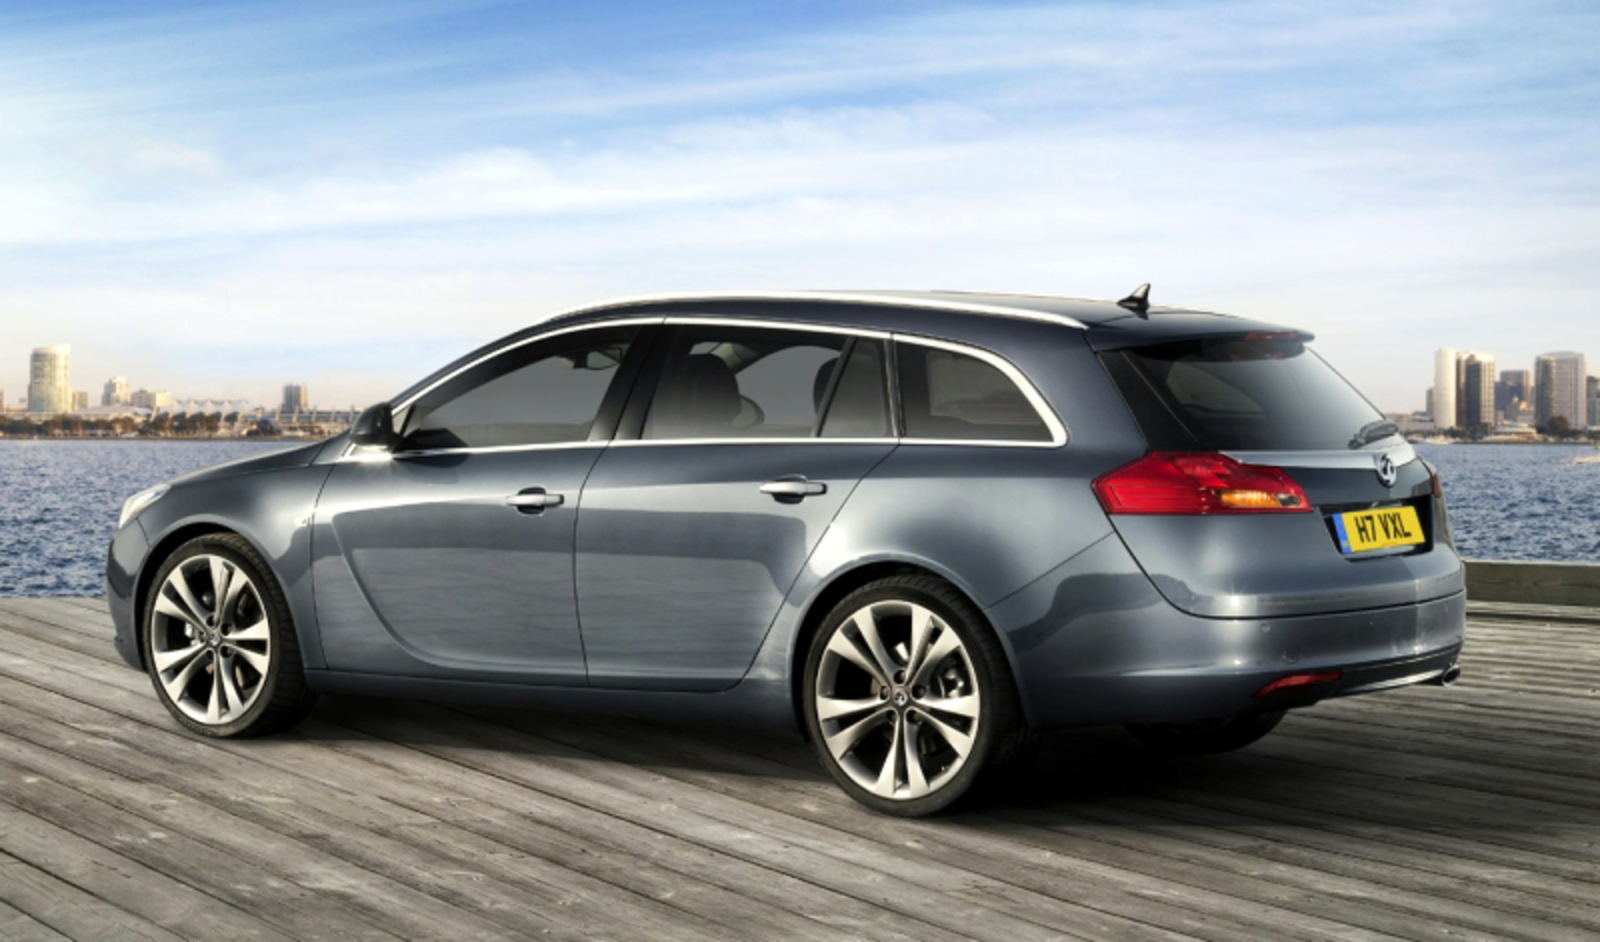 Opel Insignia Wagon. View Download Wallpaper. 800x471. Comments